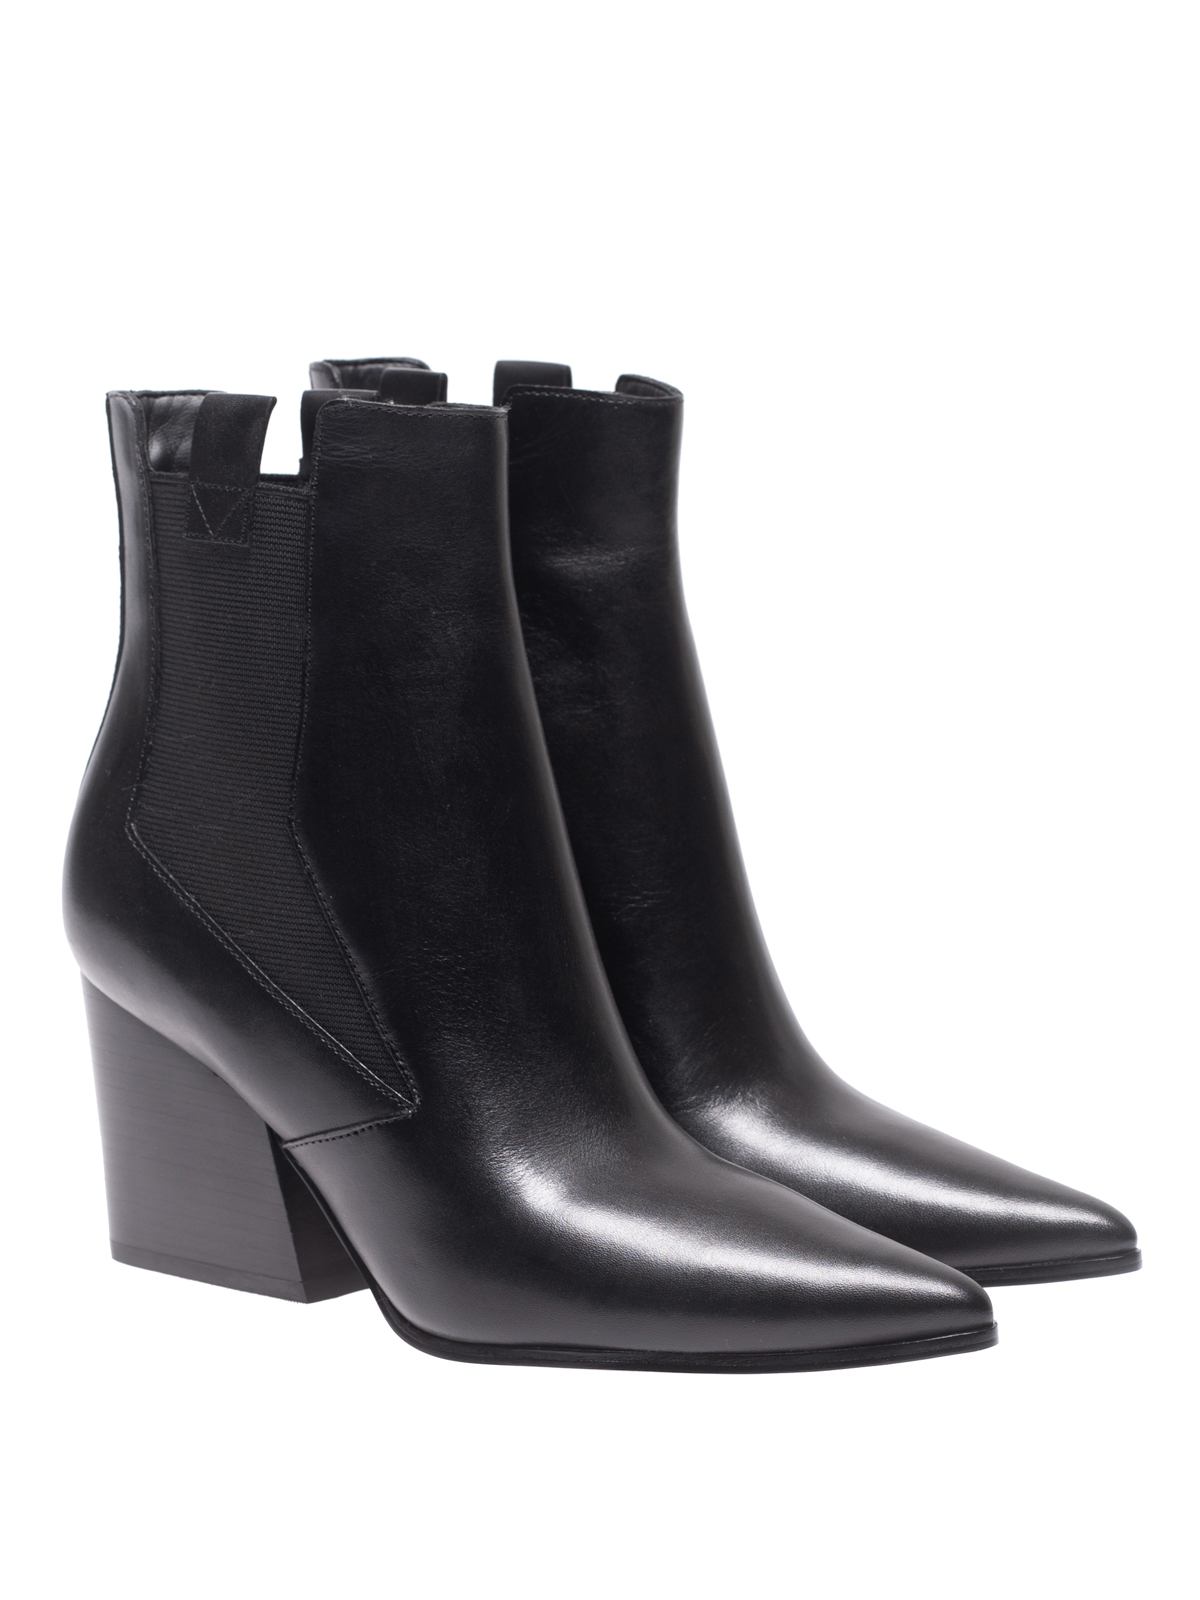 Buy > kendall kylie ankle boots > in stock